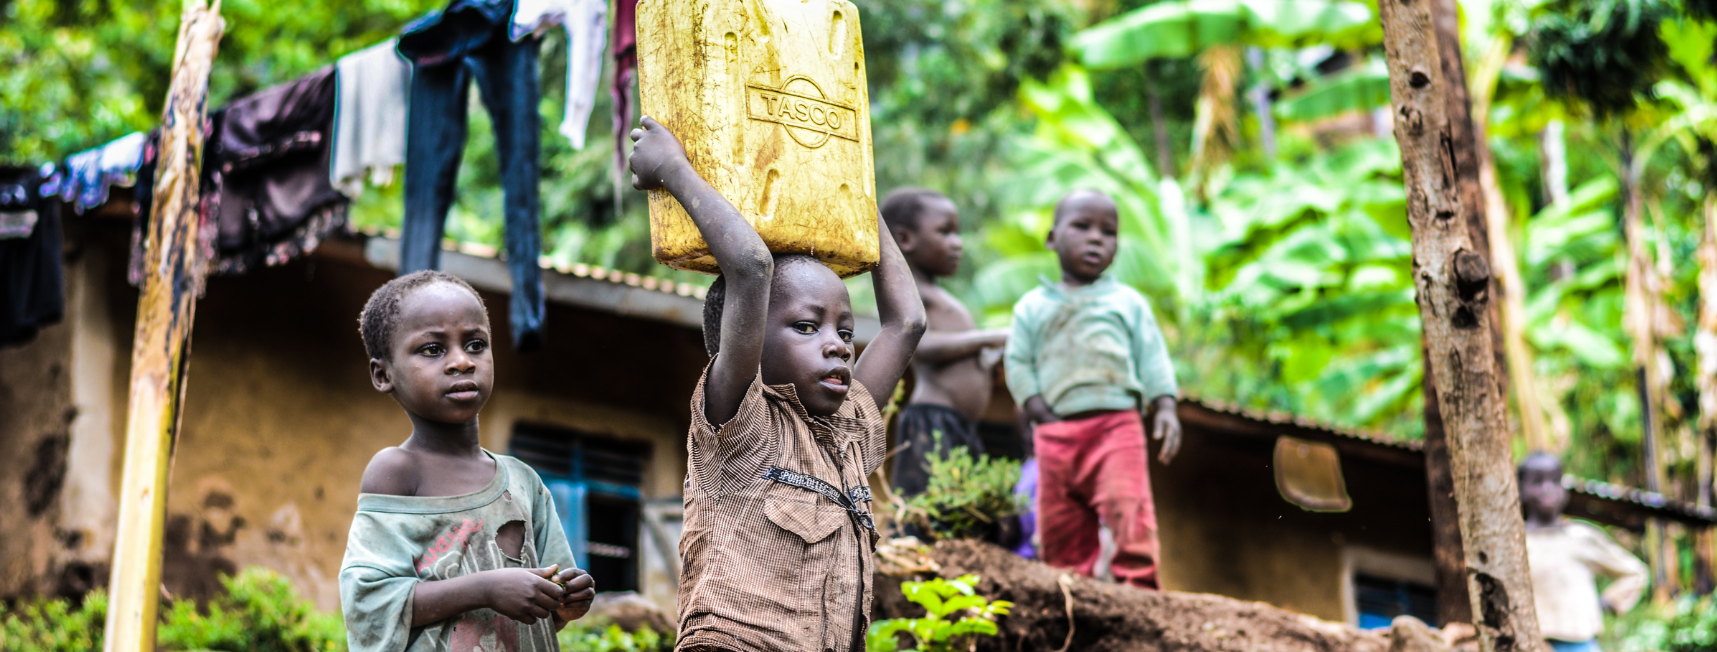 An image of a child carrying a bucket of water above their head. The child appears to live in poverty and in stood infront of a 'slum' with several friends.